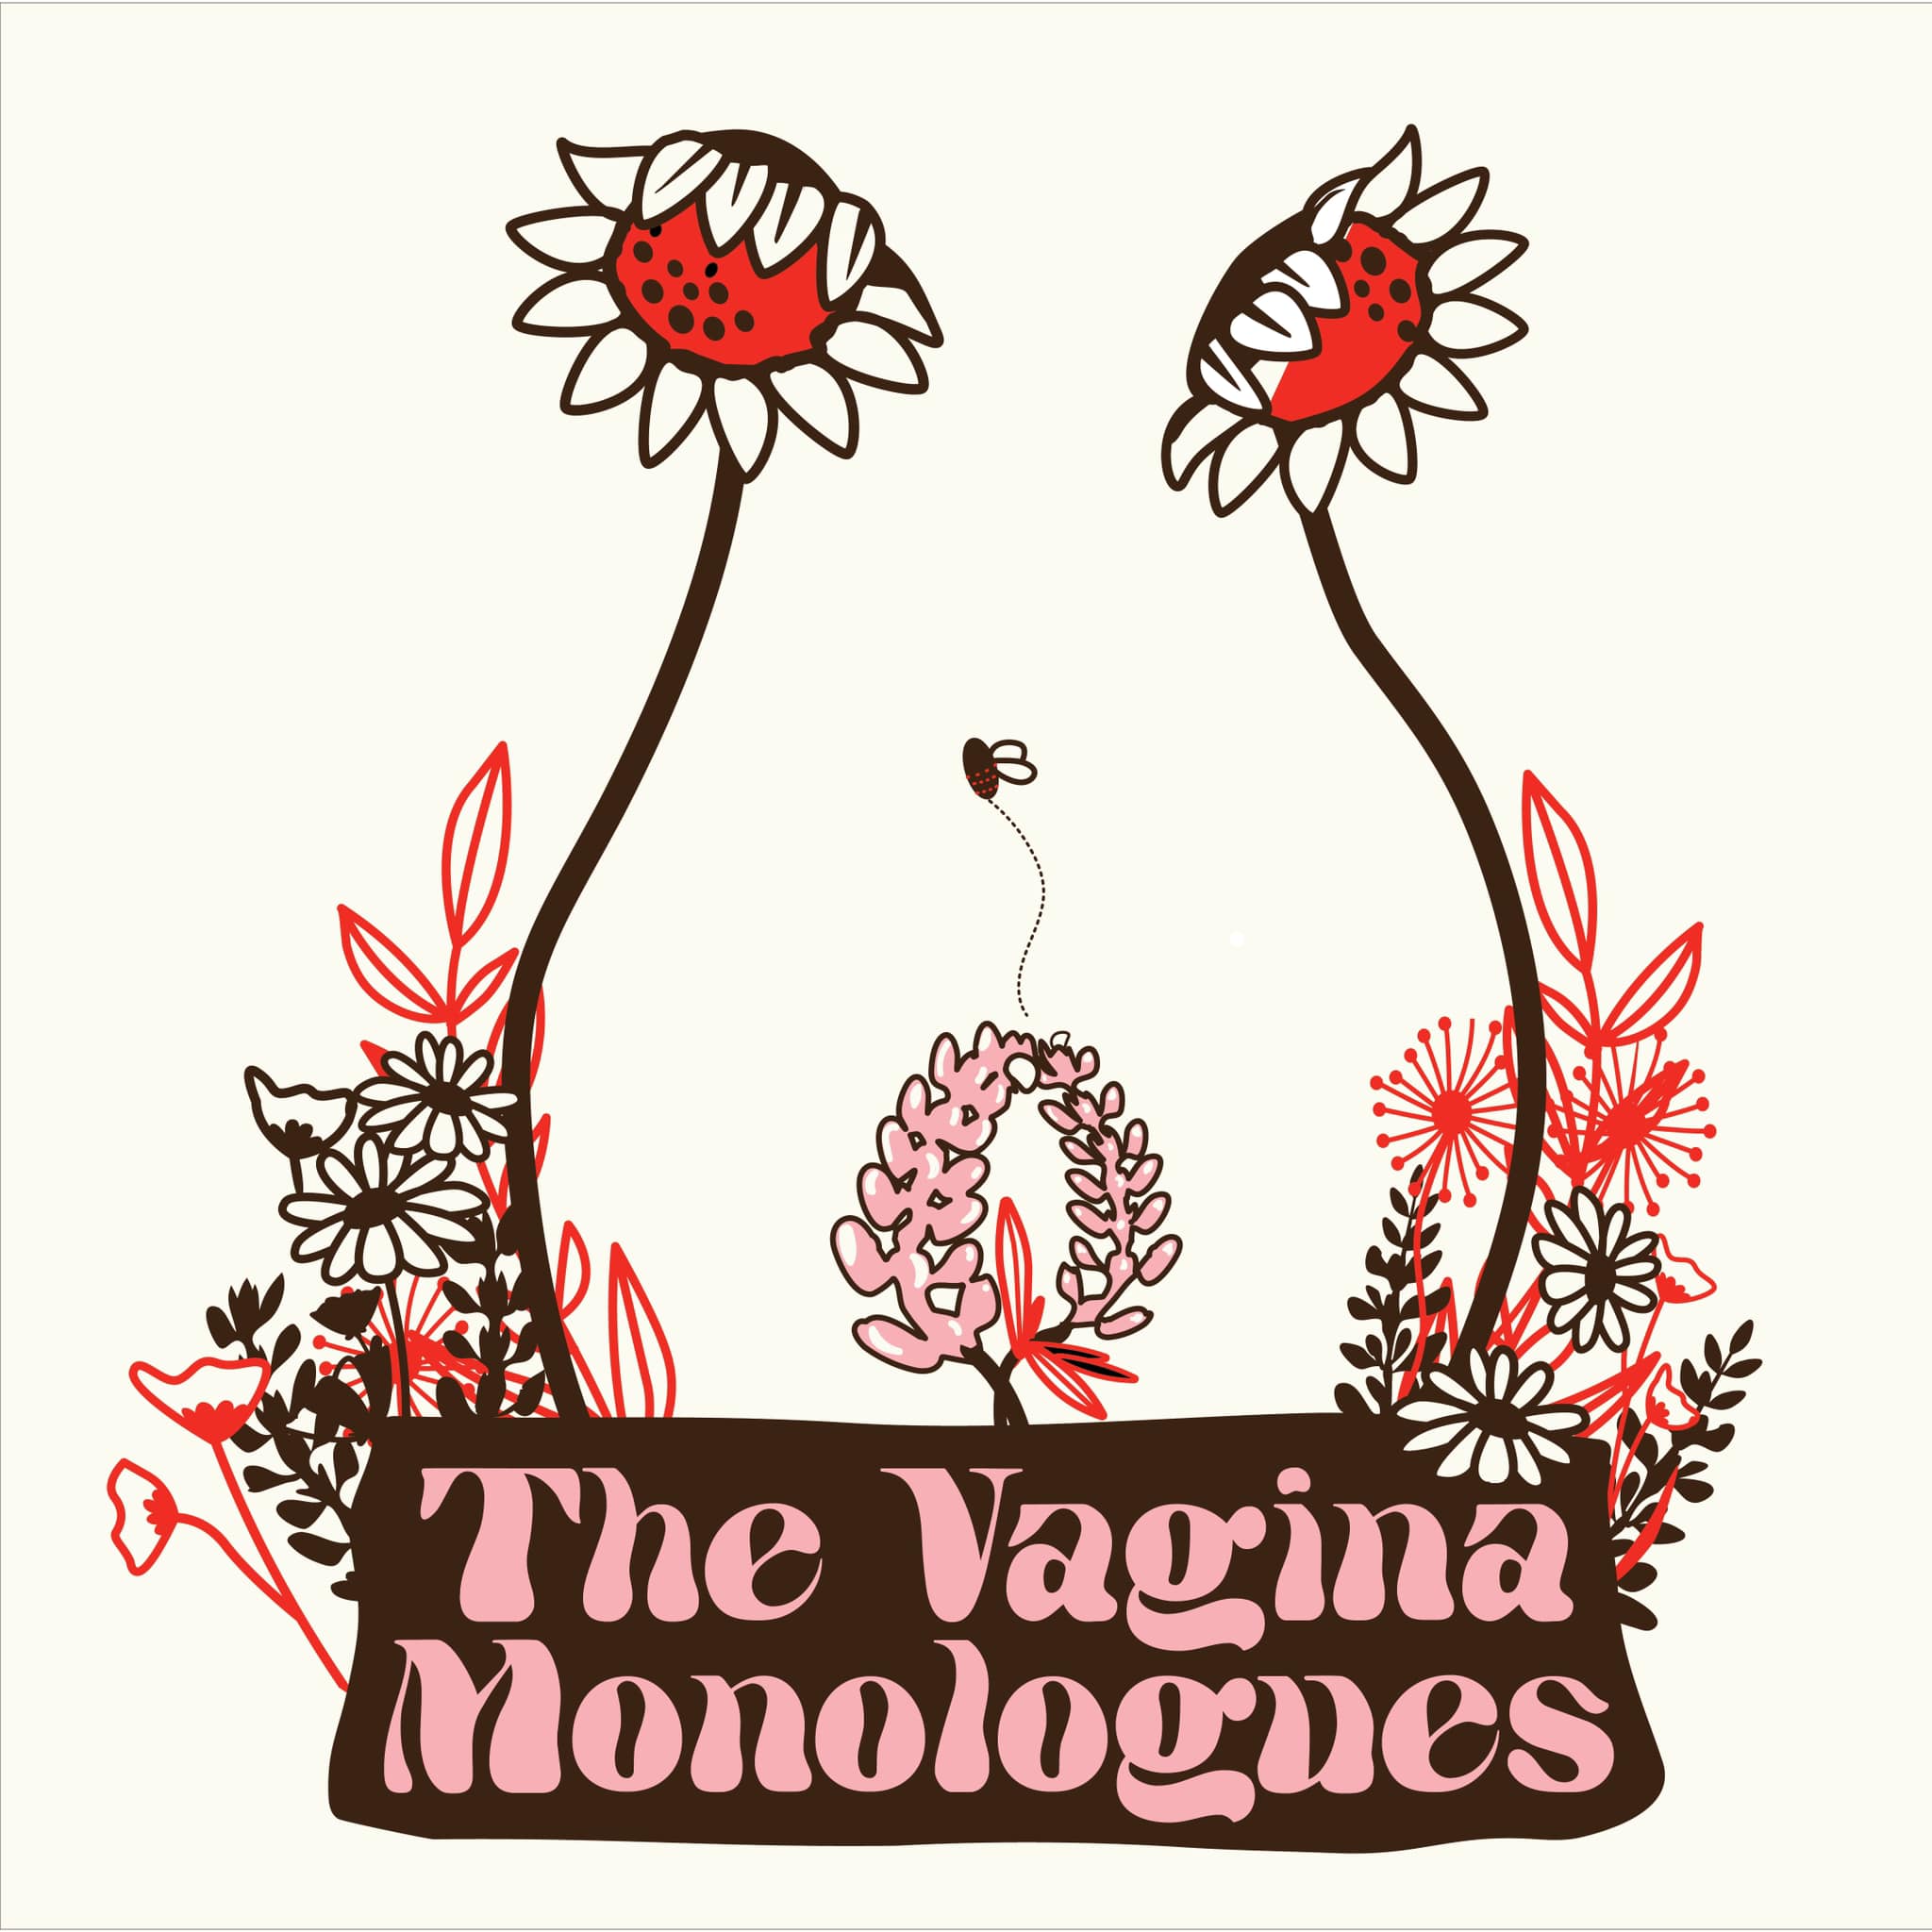 The Vagina Monologues by Hays Caldwell Women's Center